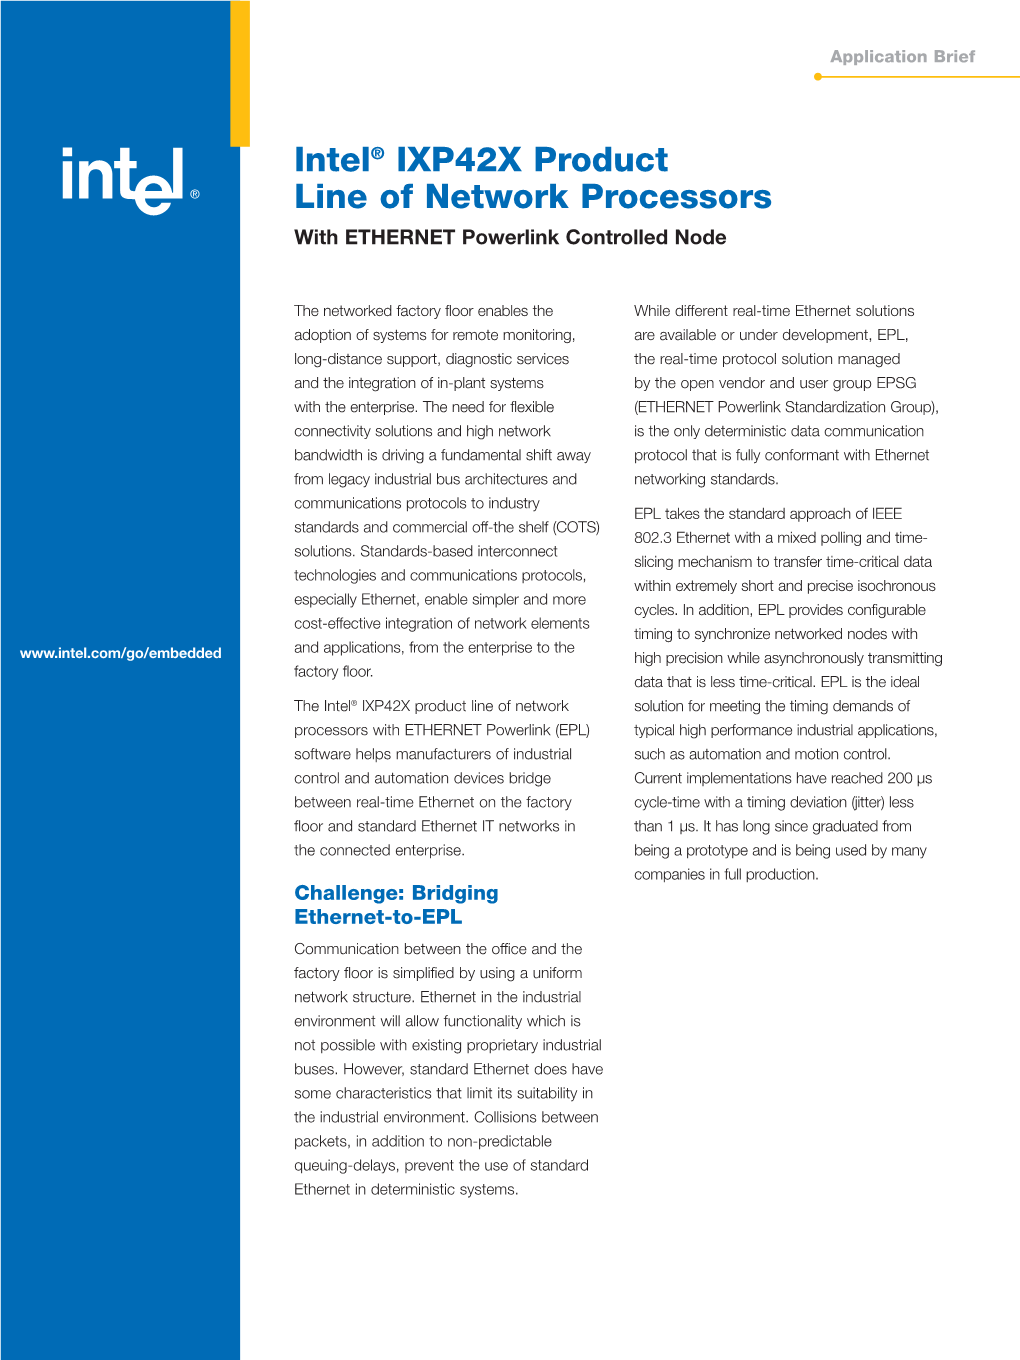 Intel® IXP42X Product Line of Network Processors with ETHERNET Powerlink Controlled Node